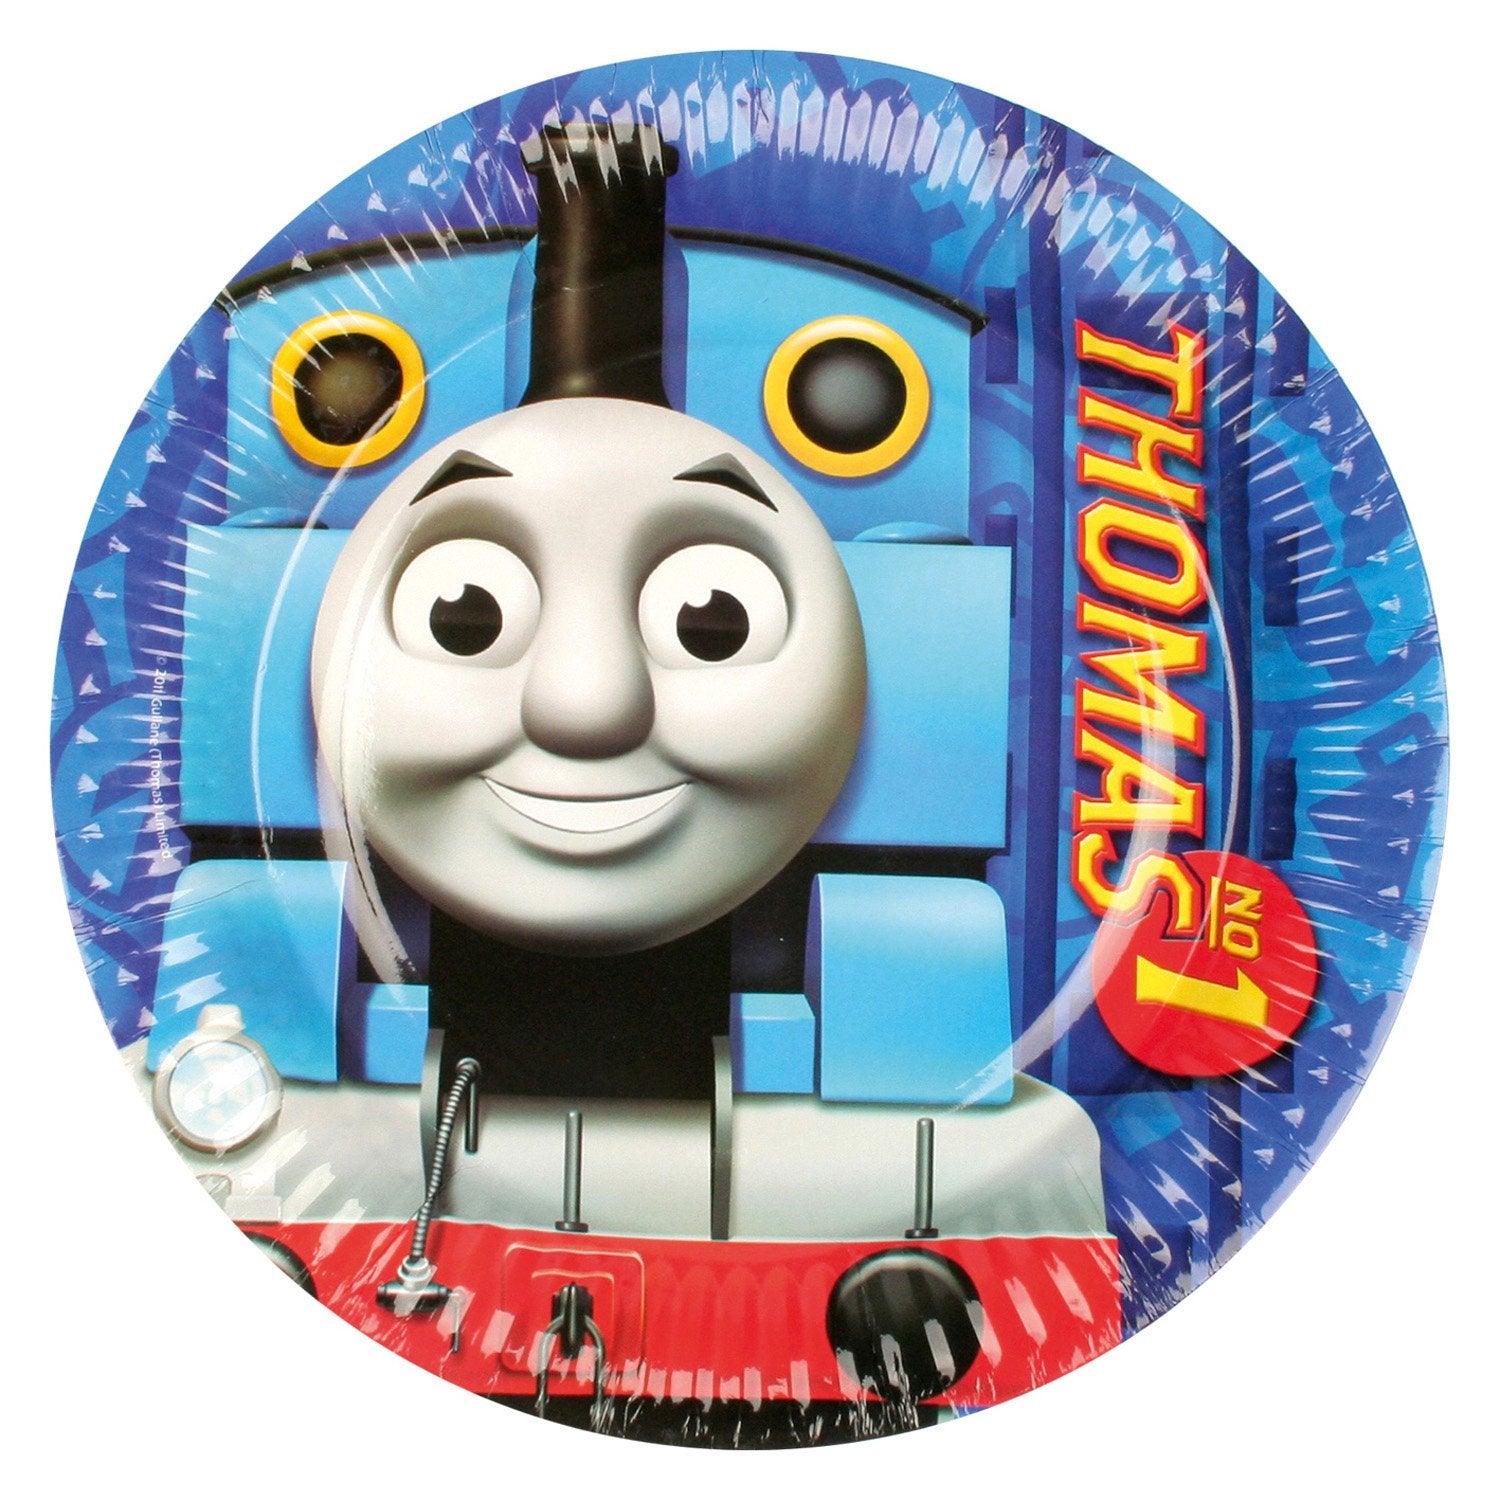 Thomas And Friends Plates 7In, 8Pcs